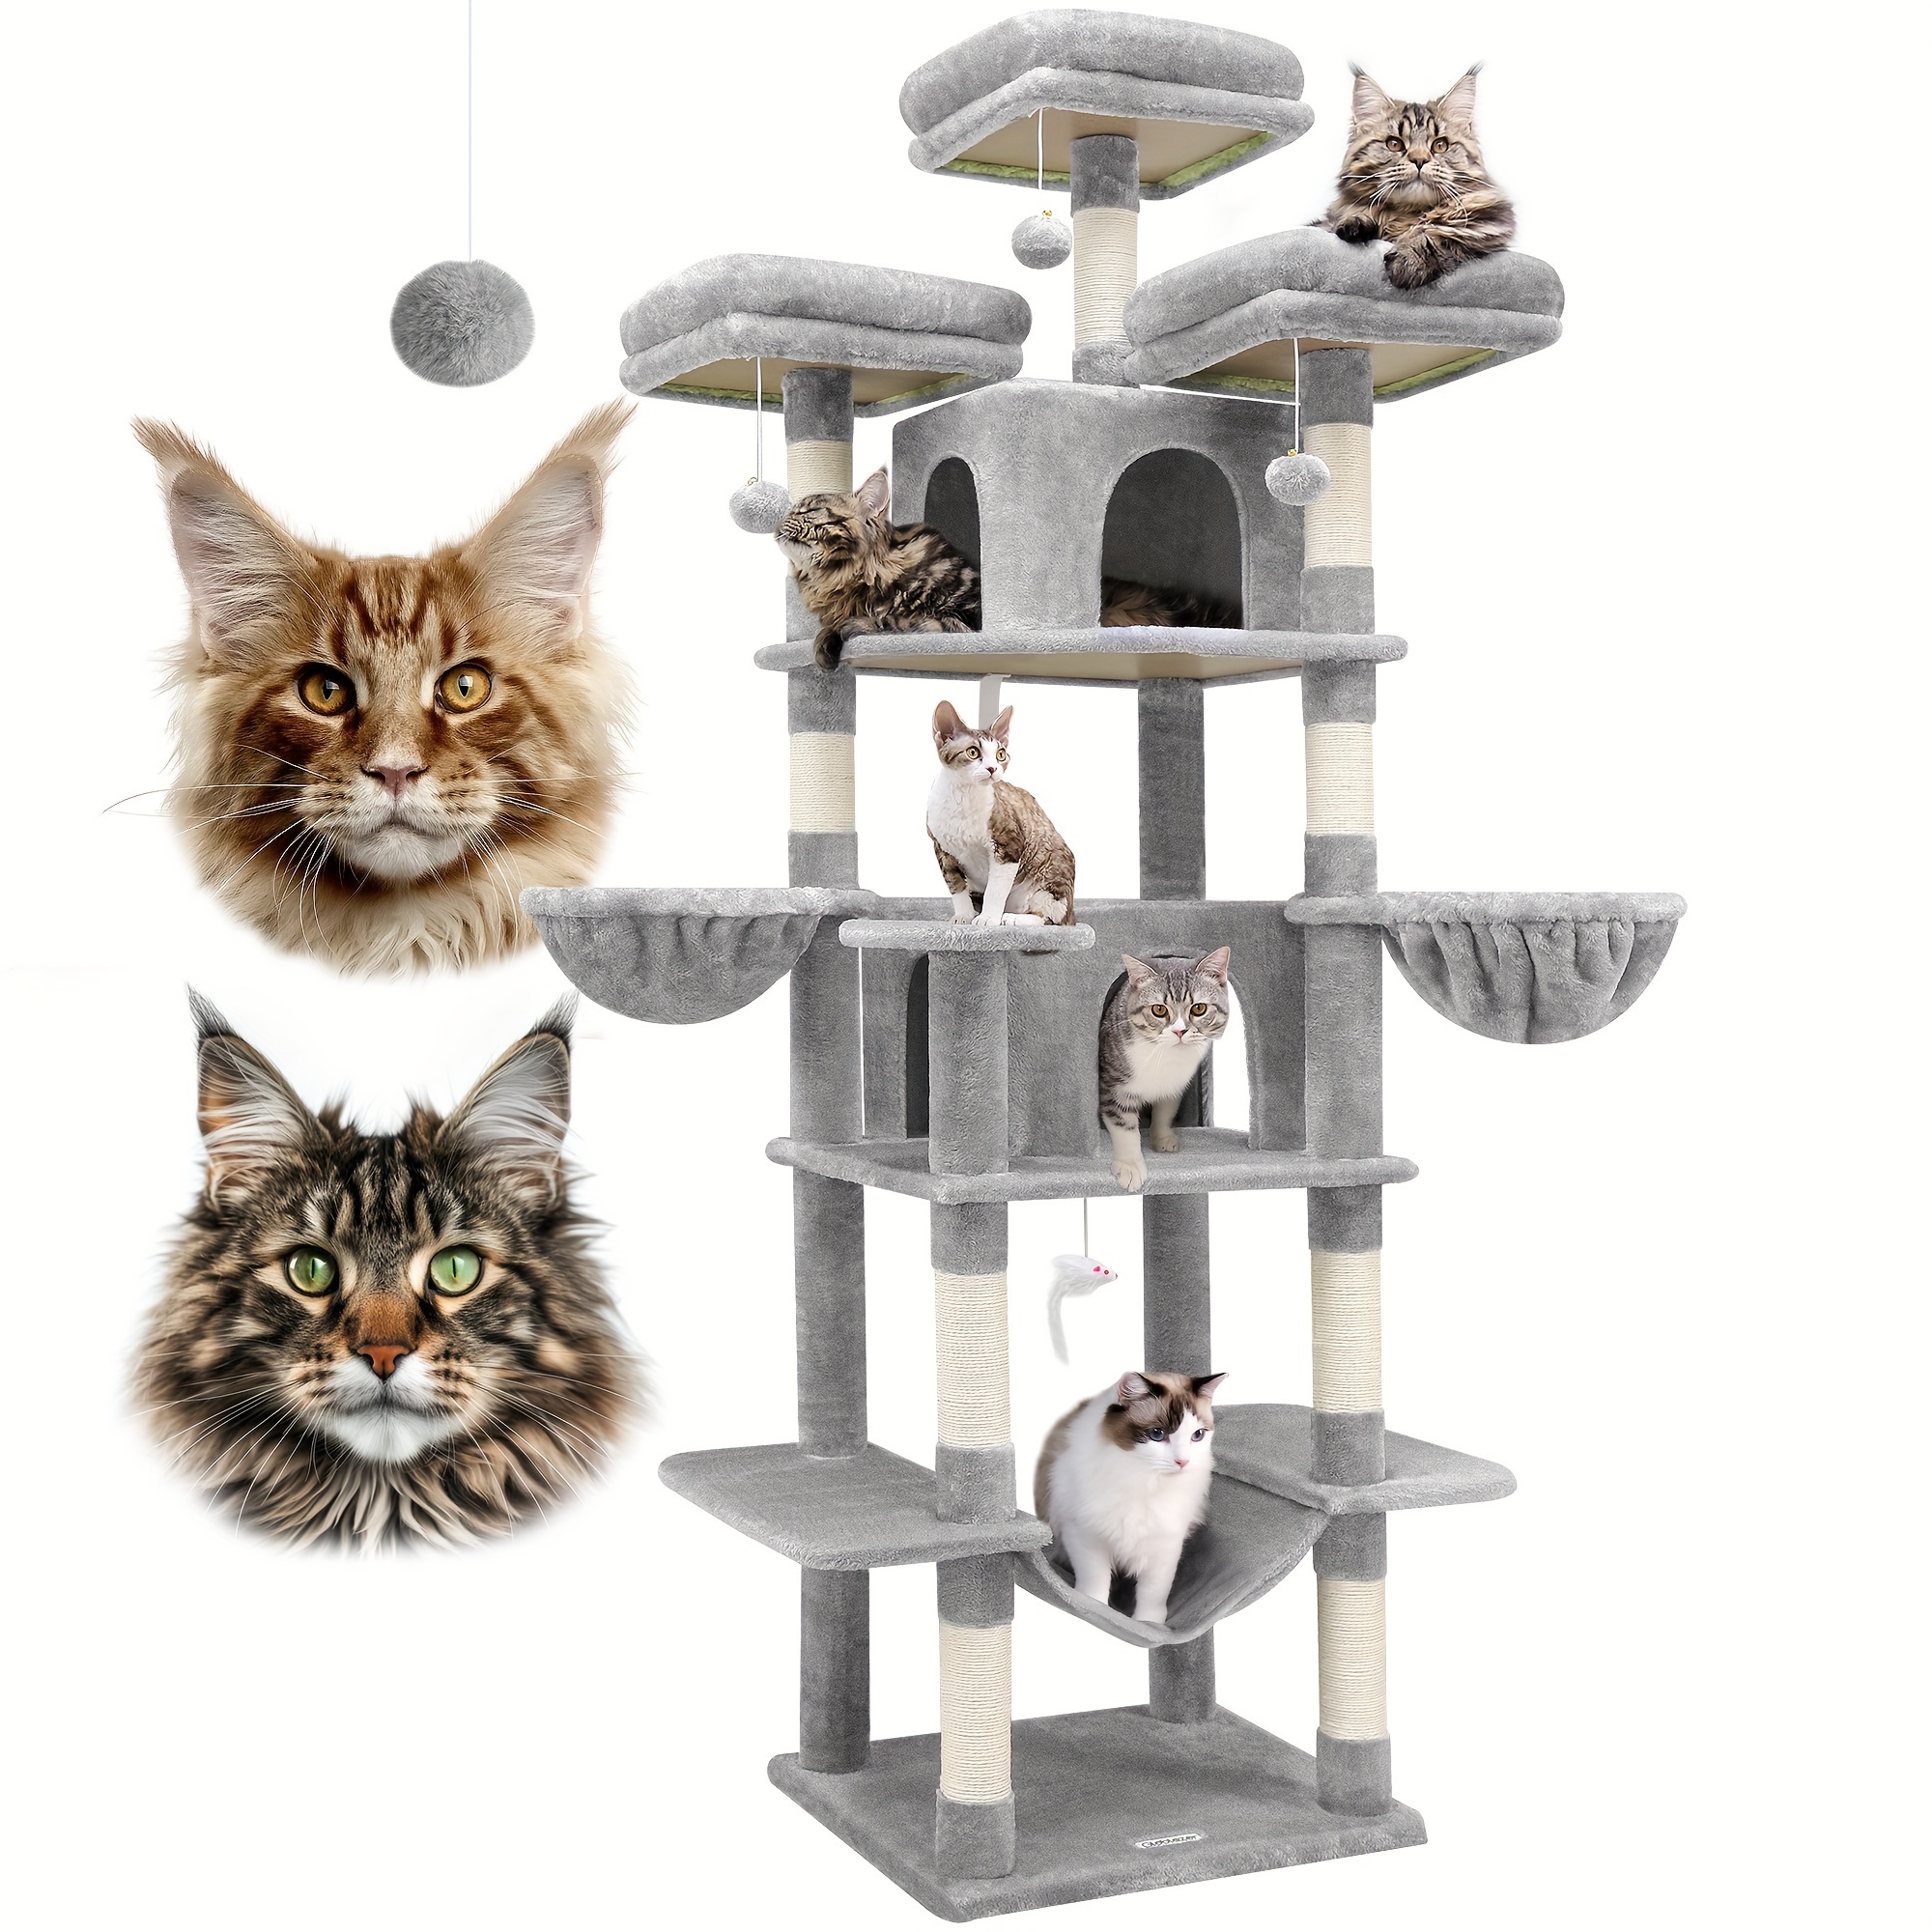 

F80 Tall Cat Tree, 80inch Cat Tree Tower For Indoor Multiple Adult Cats Xxl Cat Tree With Scratching Post, Hammock, 3 Perches, 2 Condos, 2 Hanging Basket